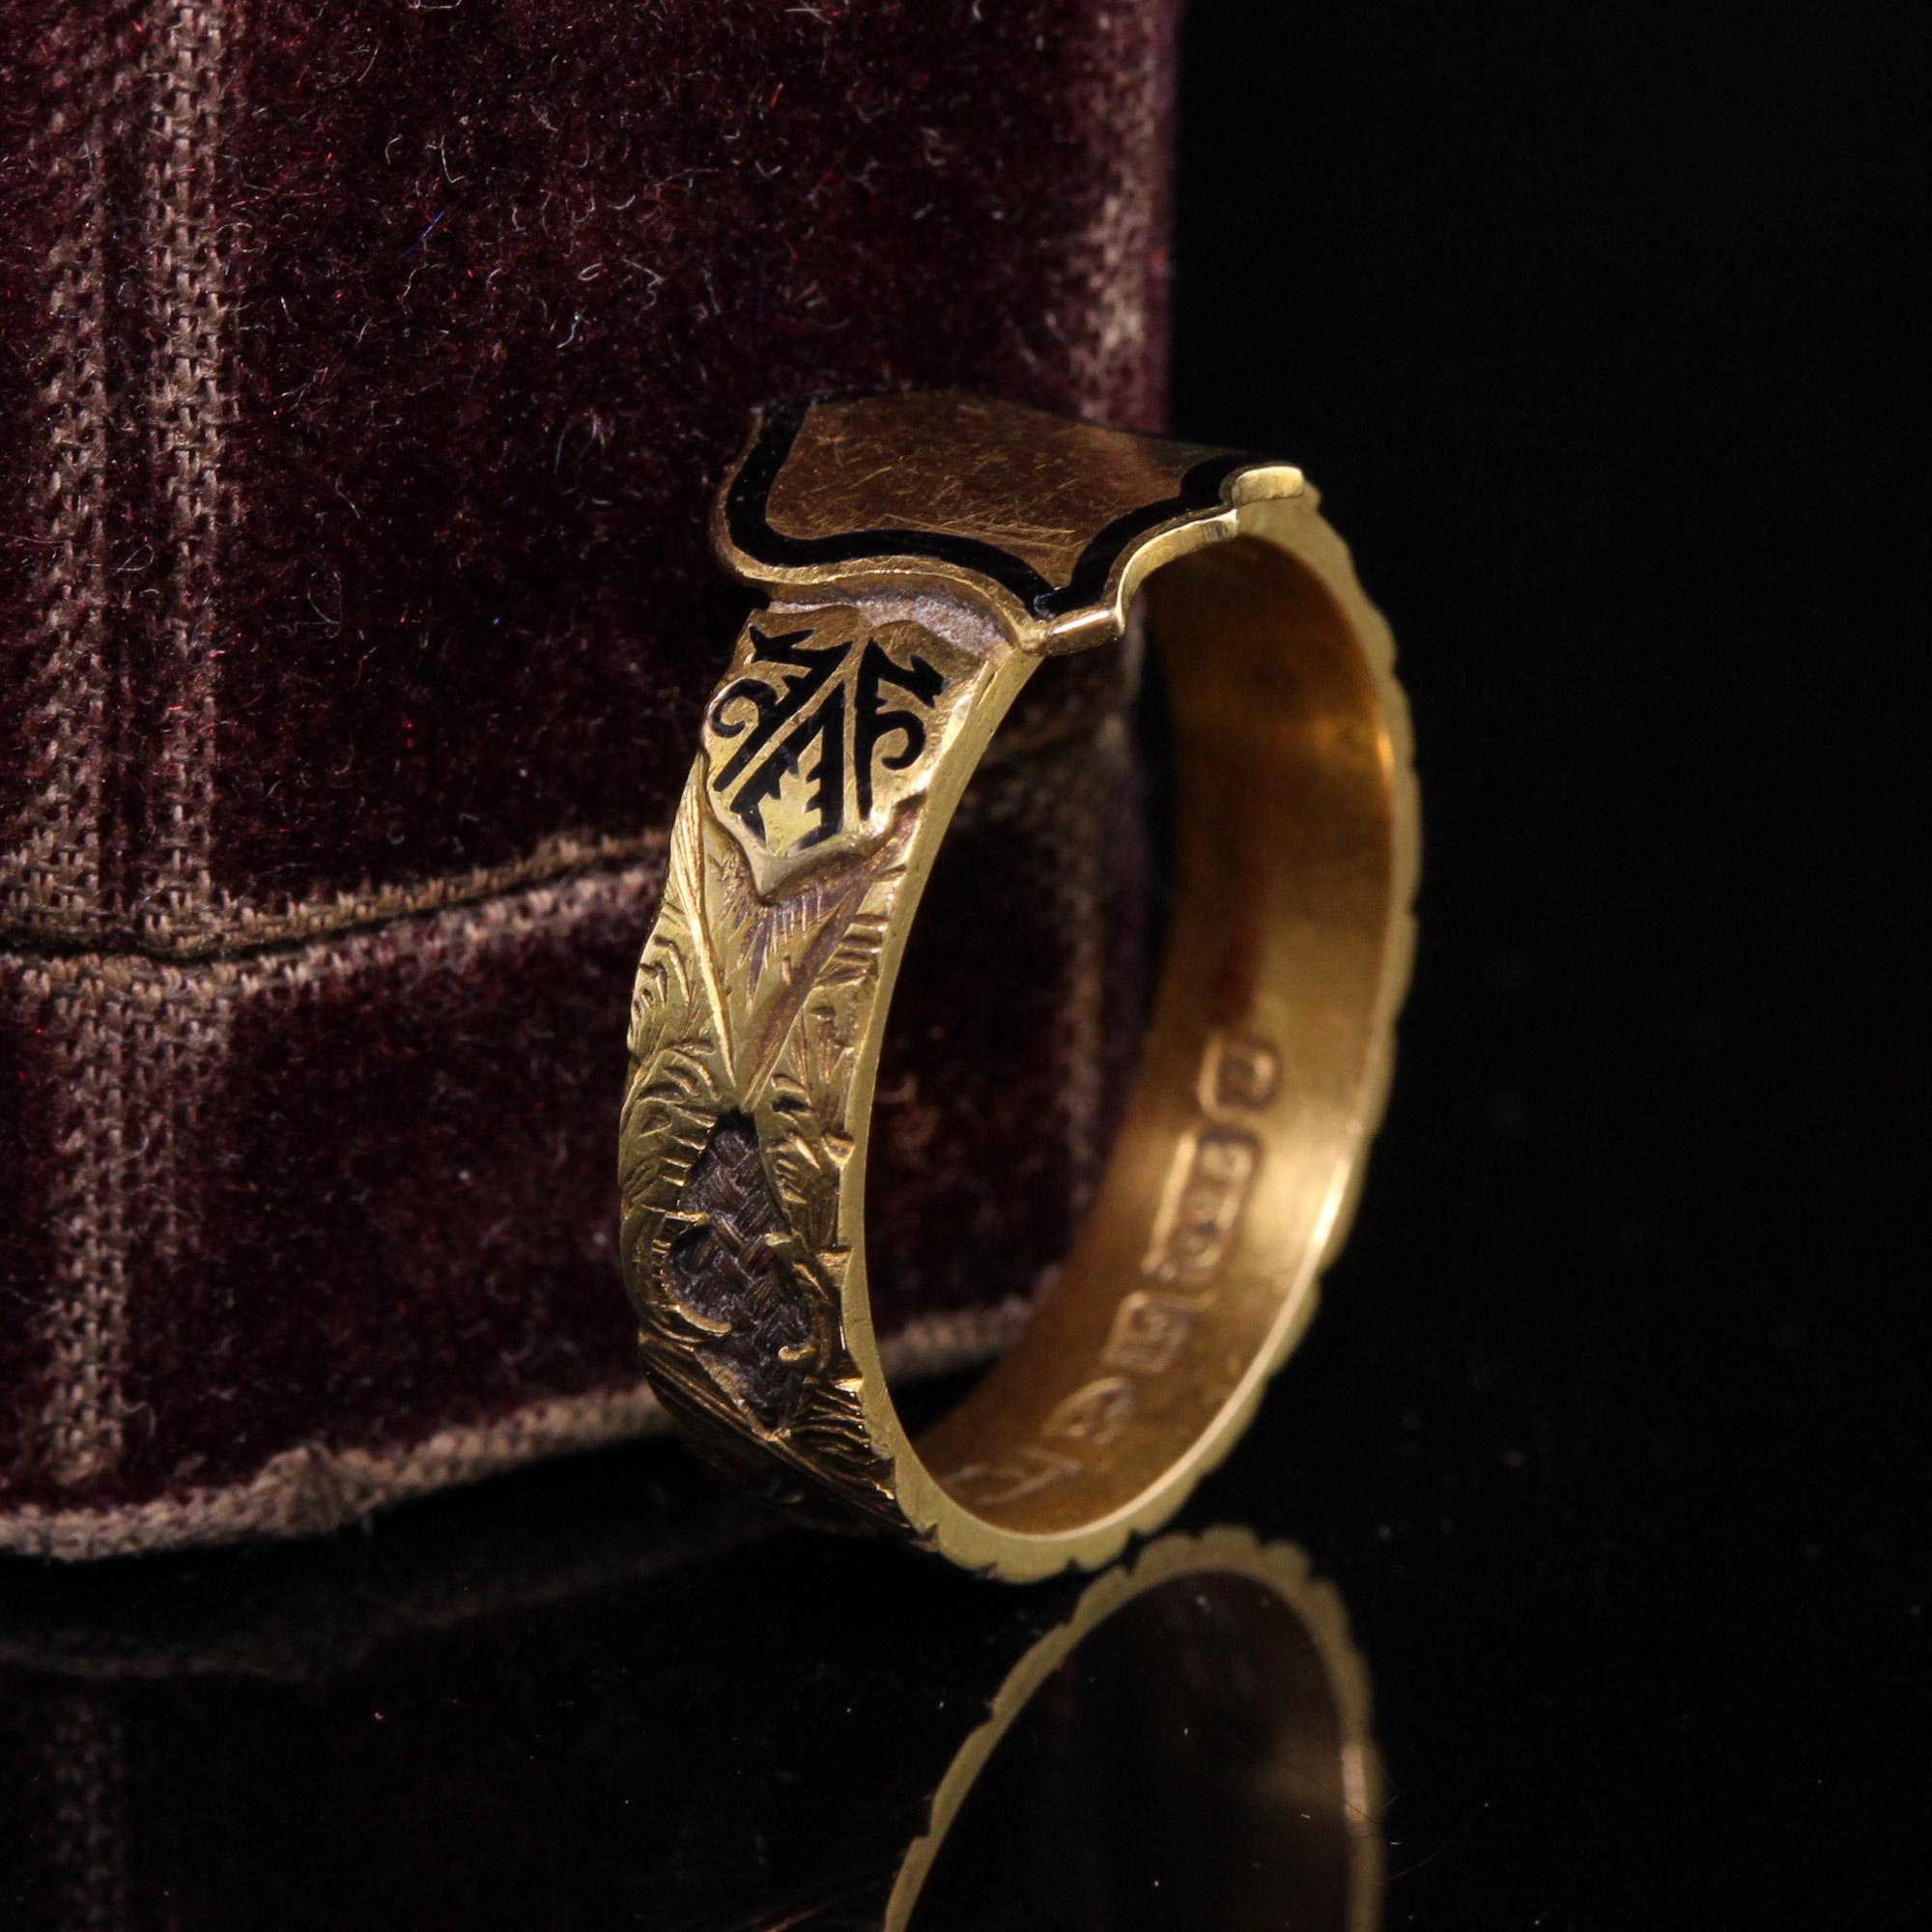 Beautiful Antique Victorian English15K Yellow Gold Enamel Hair Signet Mourning Ring. This incredible mourning ring is in exceptionally great condition and is fully hallmarked. The inside of the ring is engraved 